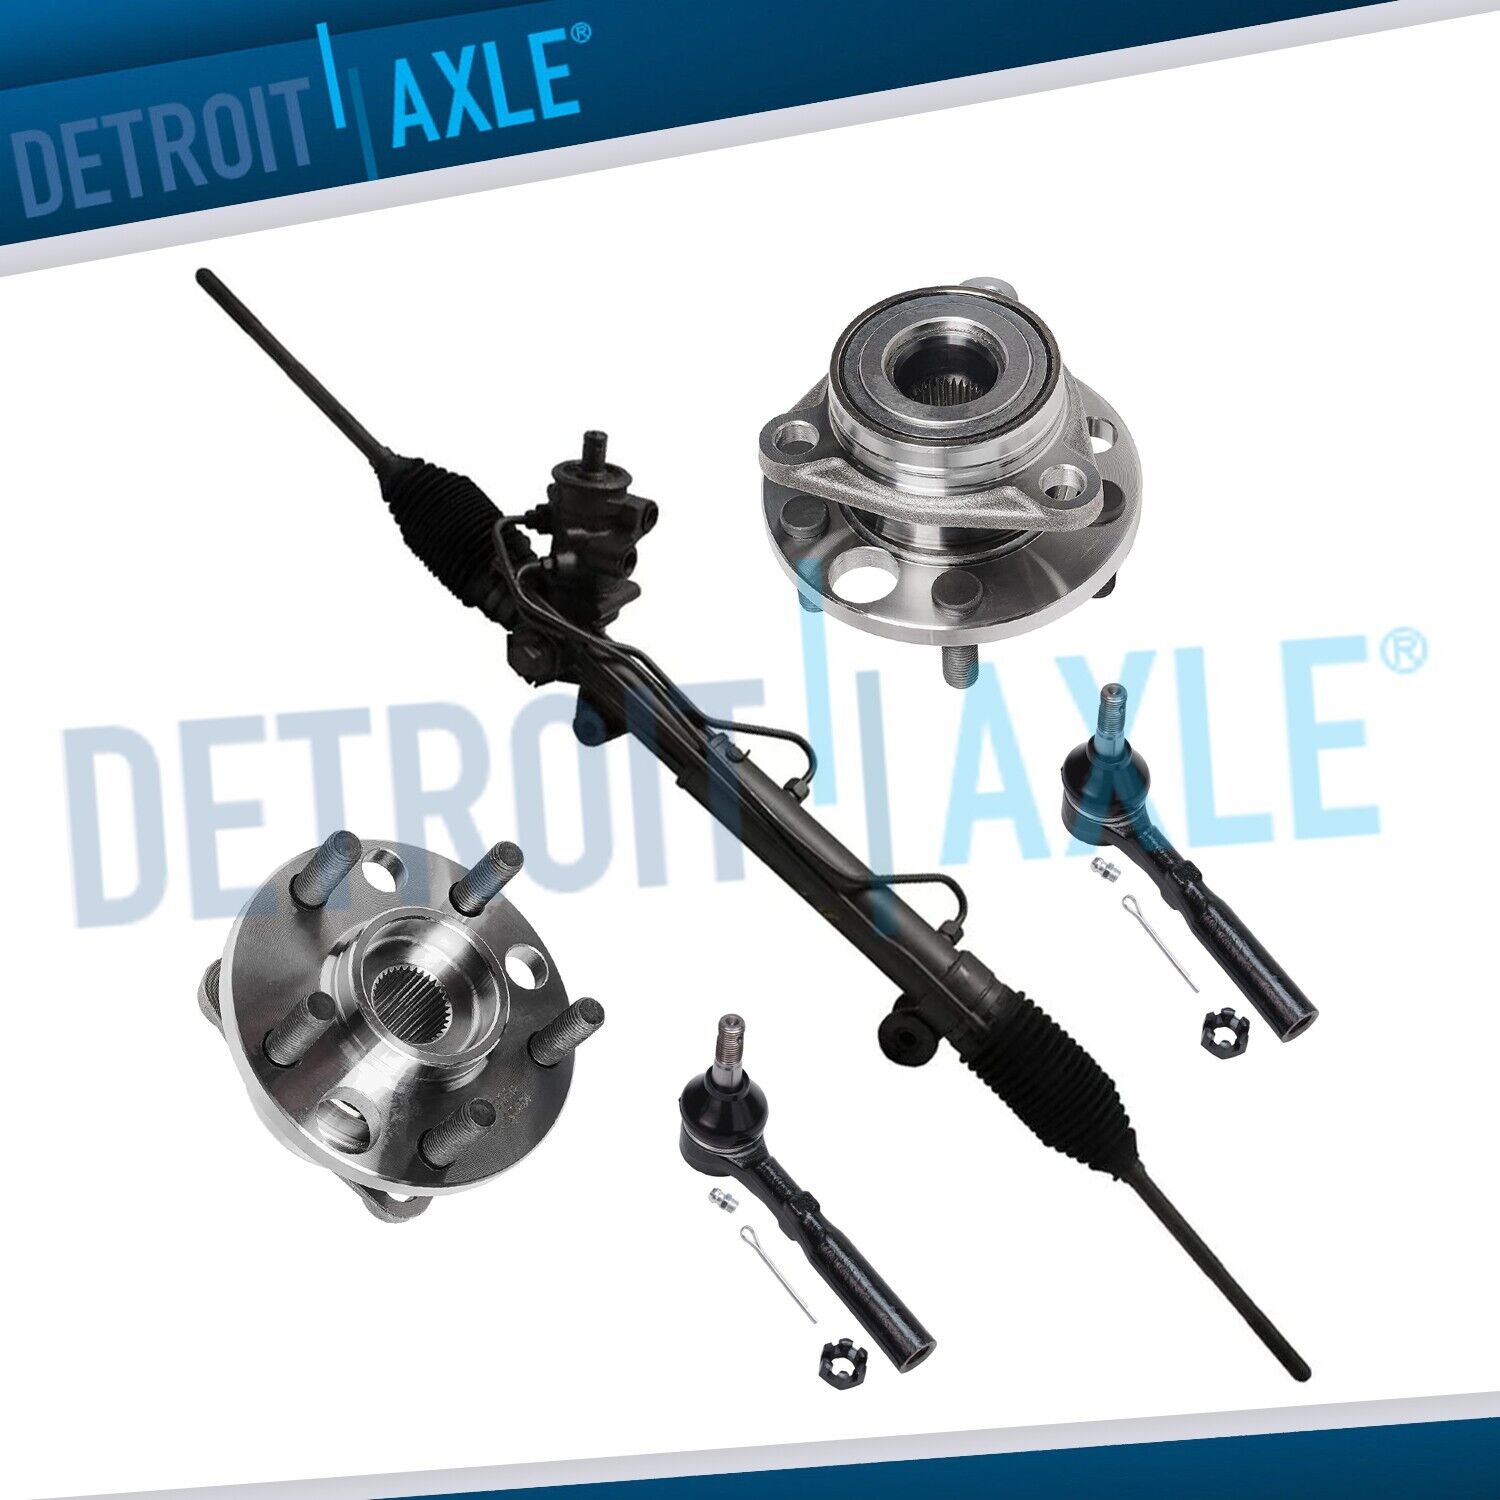 5pc Steering Rack & Pinion + Wheel Hub +Outer Tie Rod for 95-05 Cavalier Sunfire